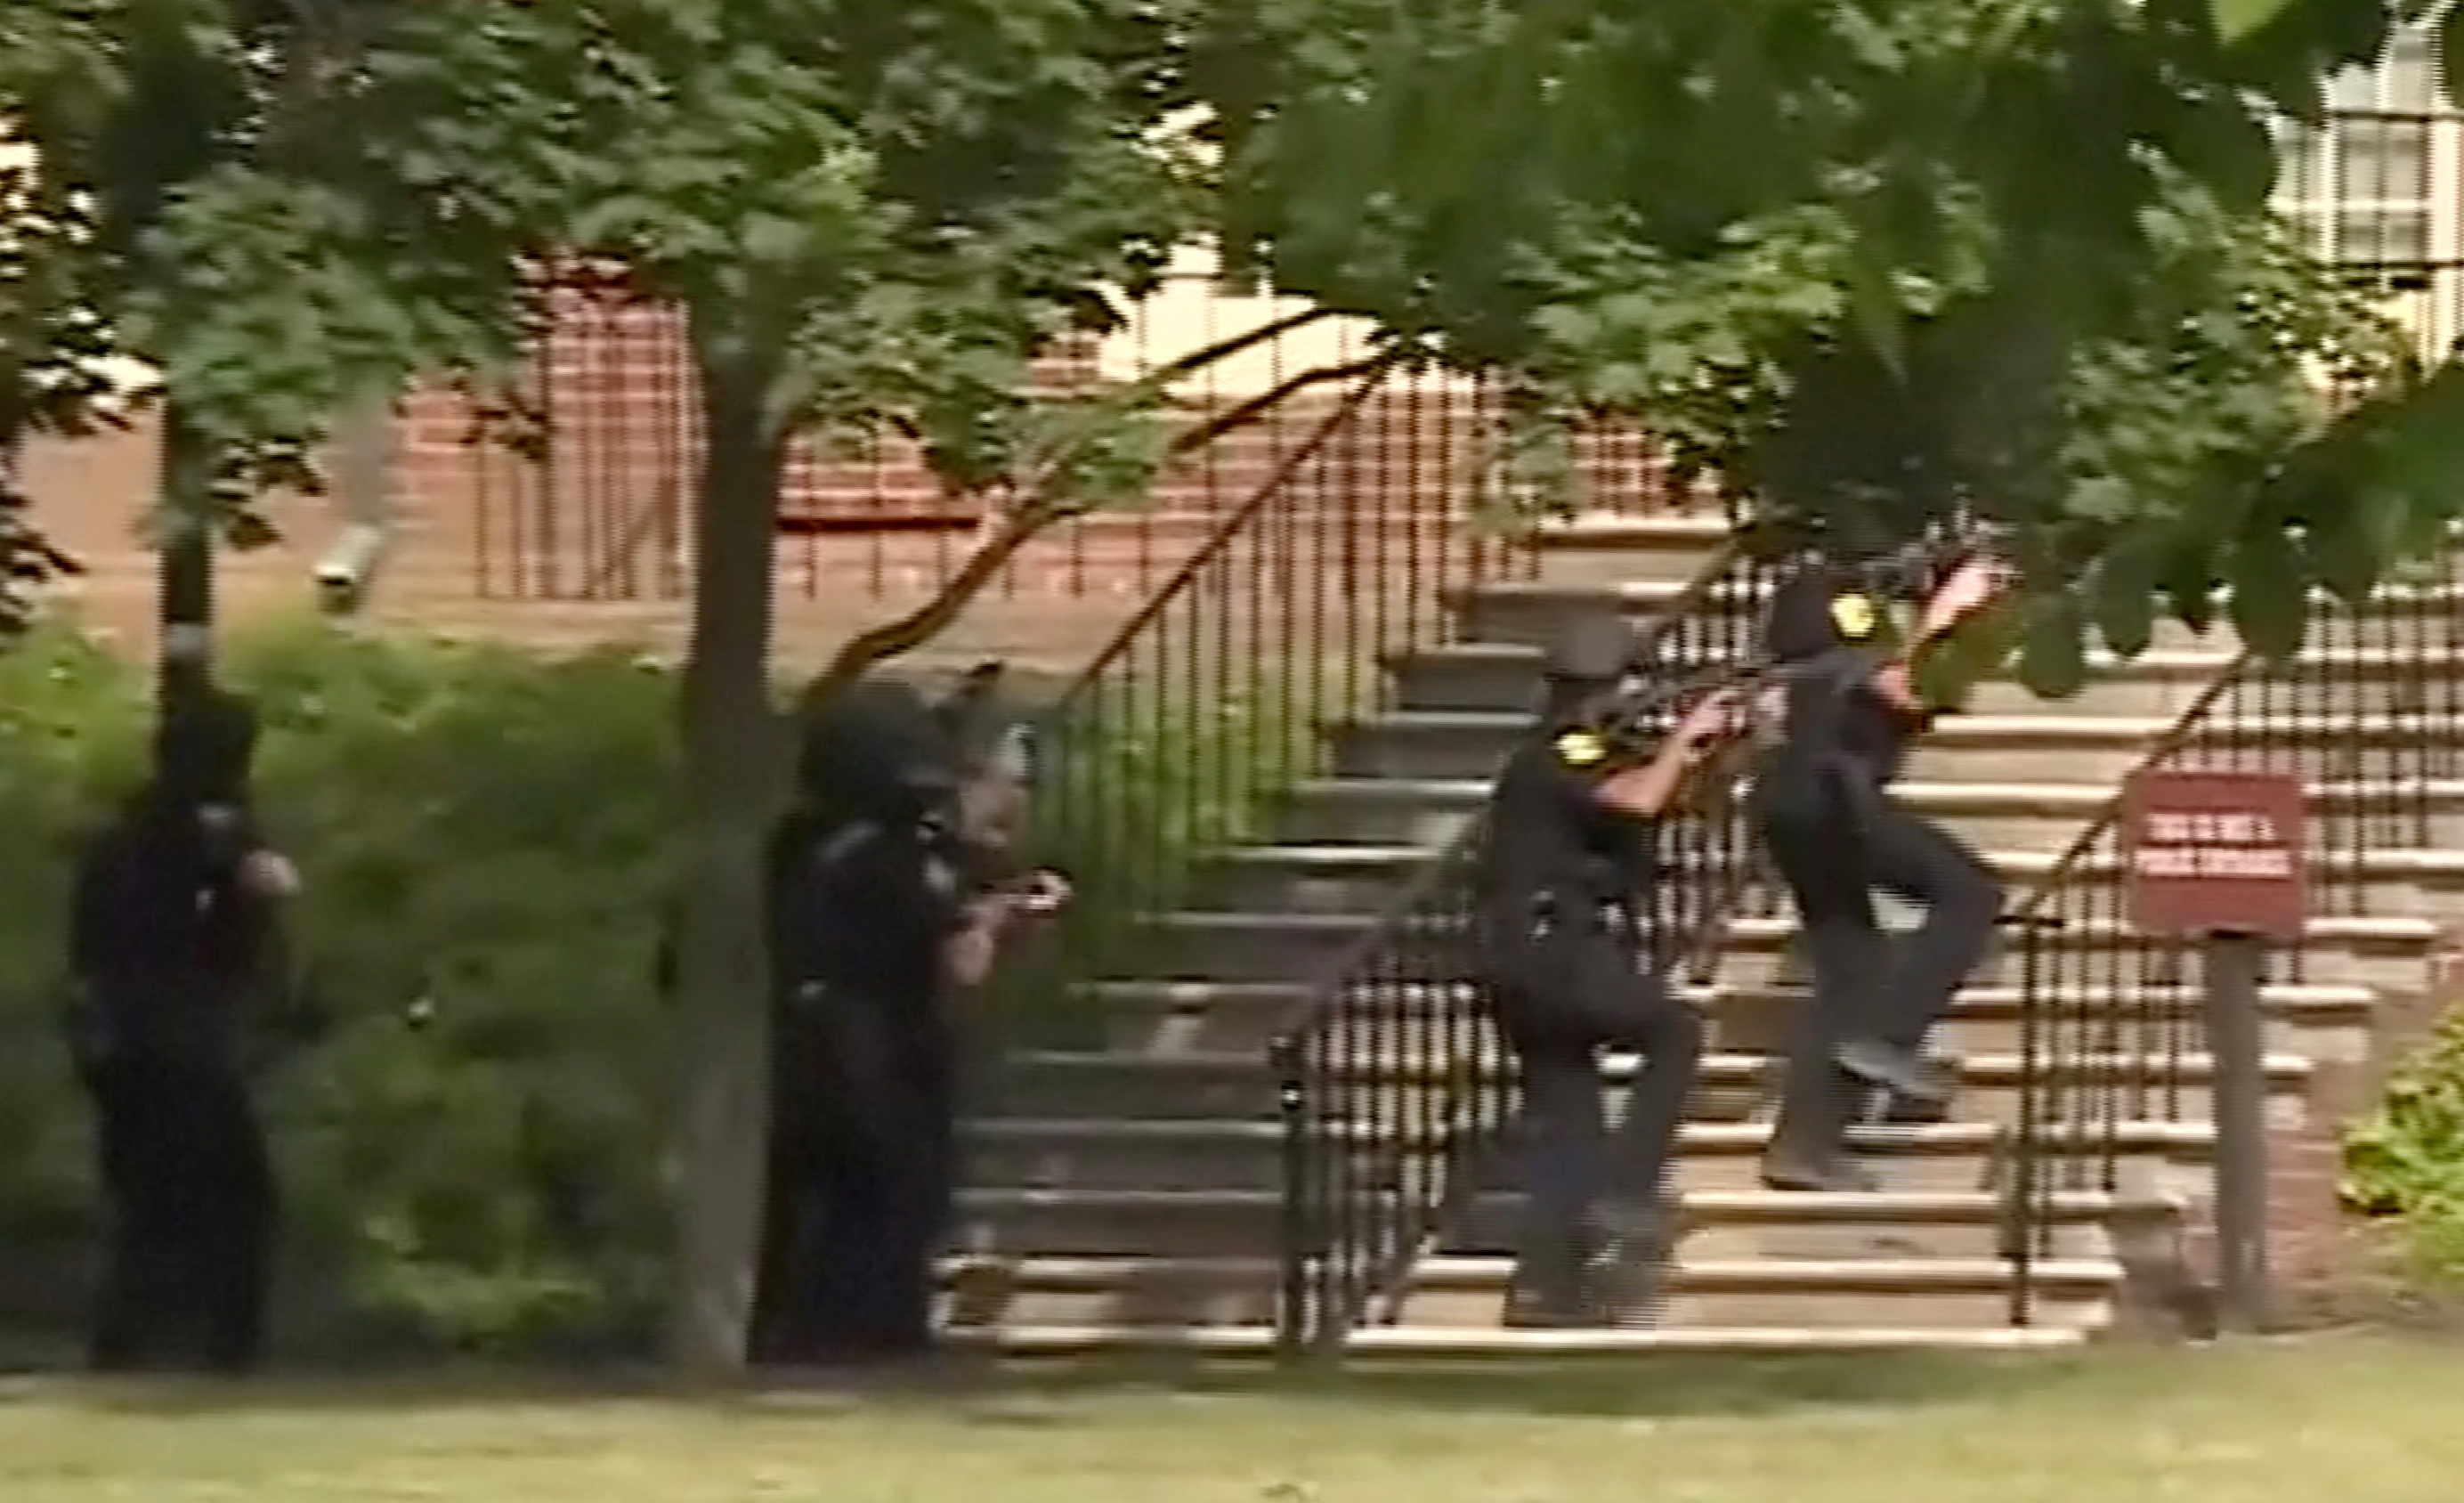 Police enter a building in this still image taken from video following a shooting incident at the municipal center in Virginia Beach, Virginia, U.S. May 31, 2019. WAVY-TV/NBC/via REUTERS